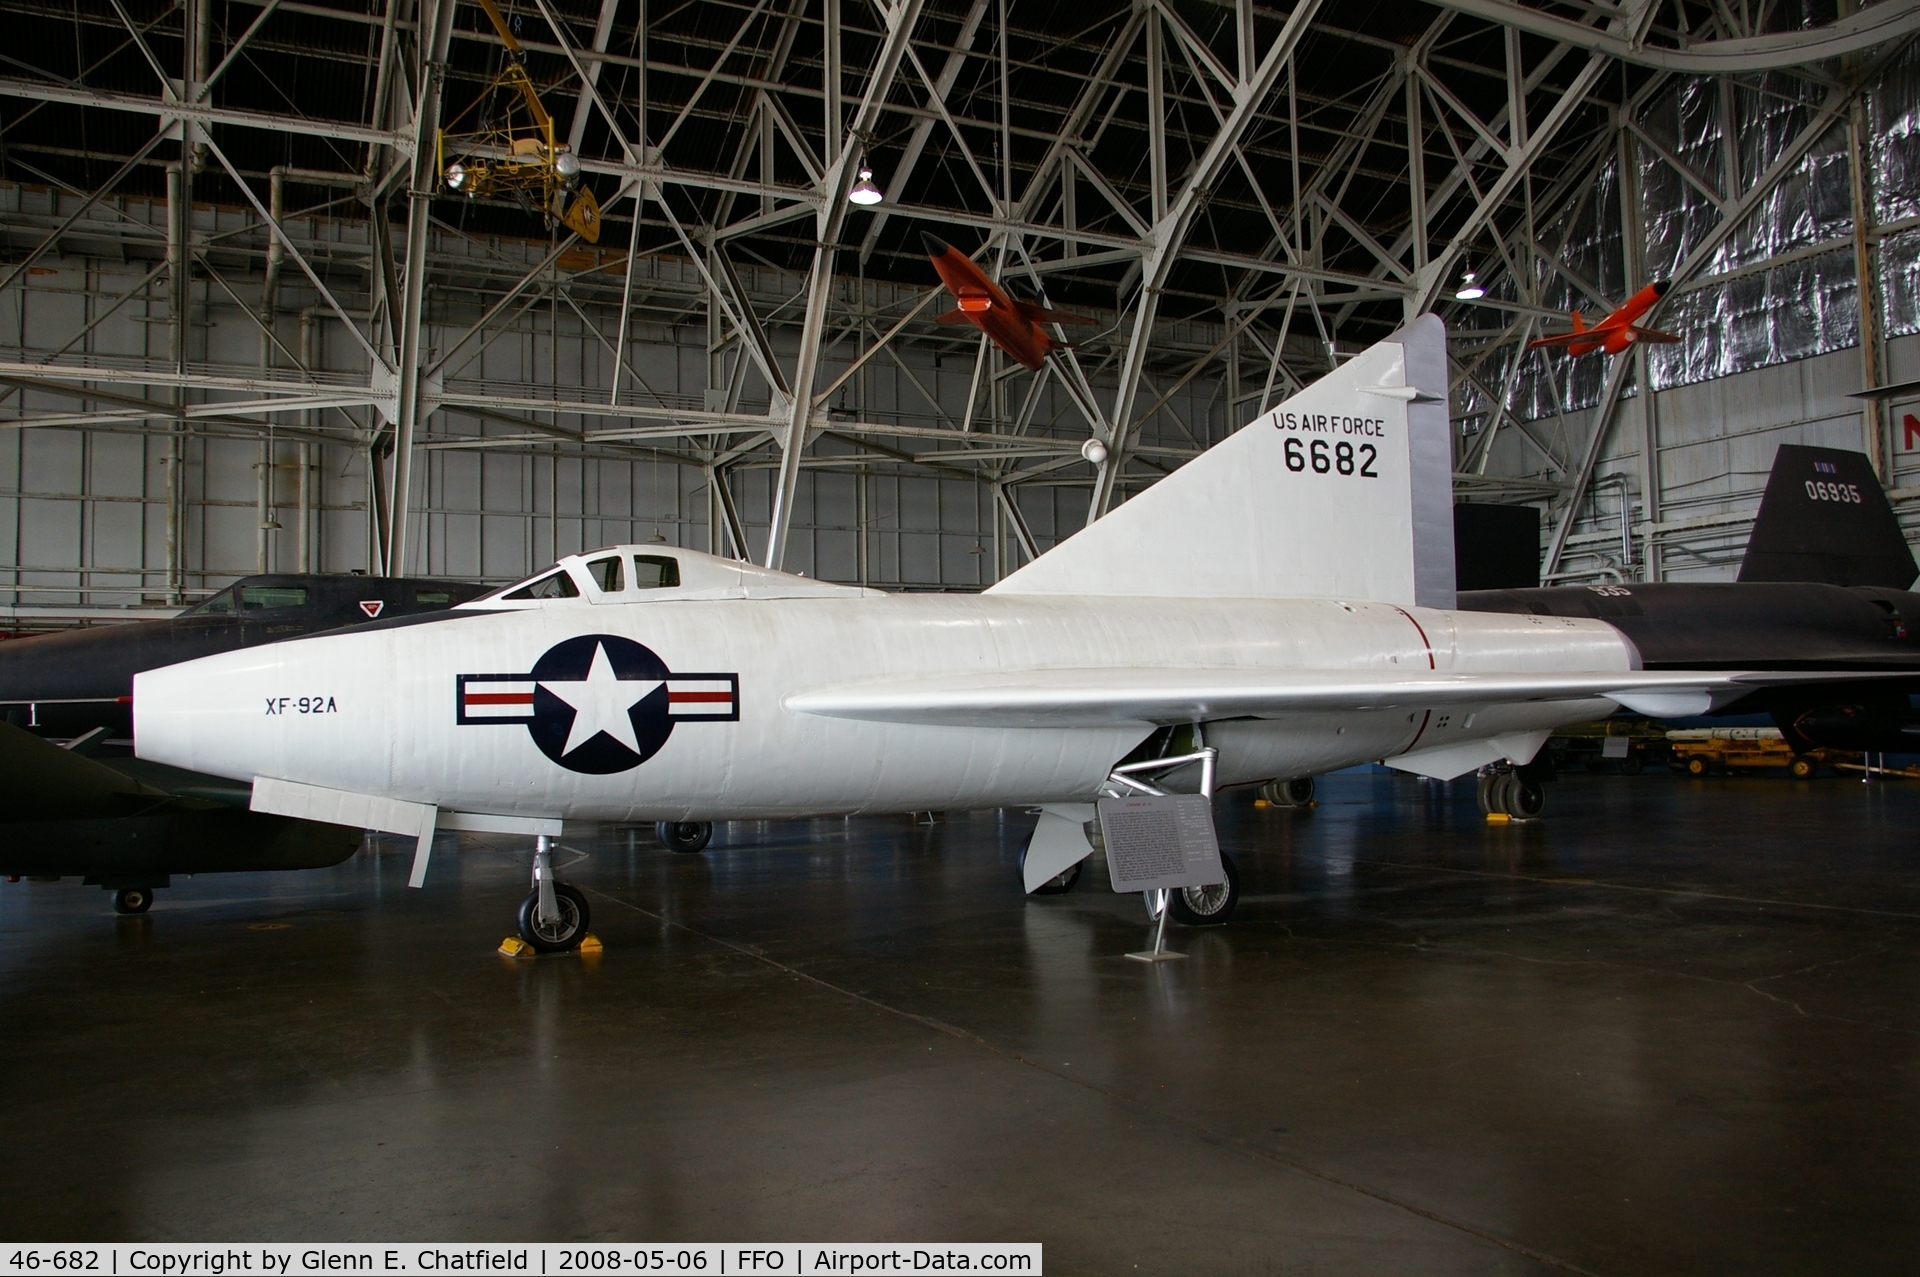 46-682, 1948 Convair XF-92A C/N 7-002, Displayed at the National Museum of the U.S. Air Force